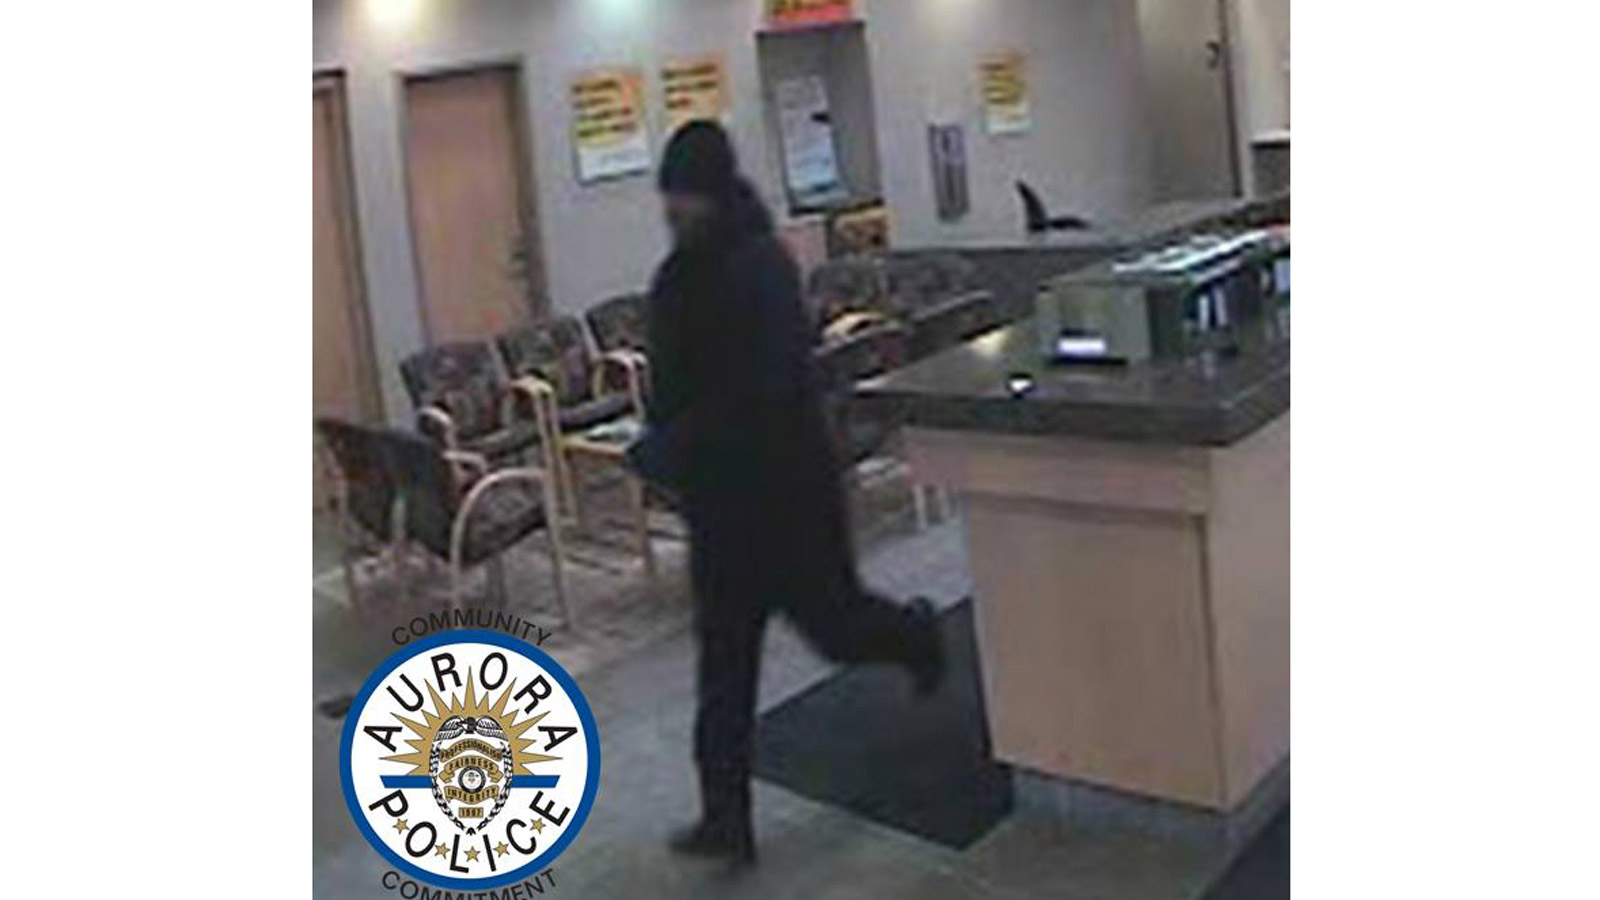 APD TCF 6th Ave earlier bank robber2